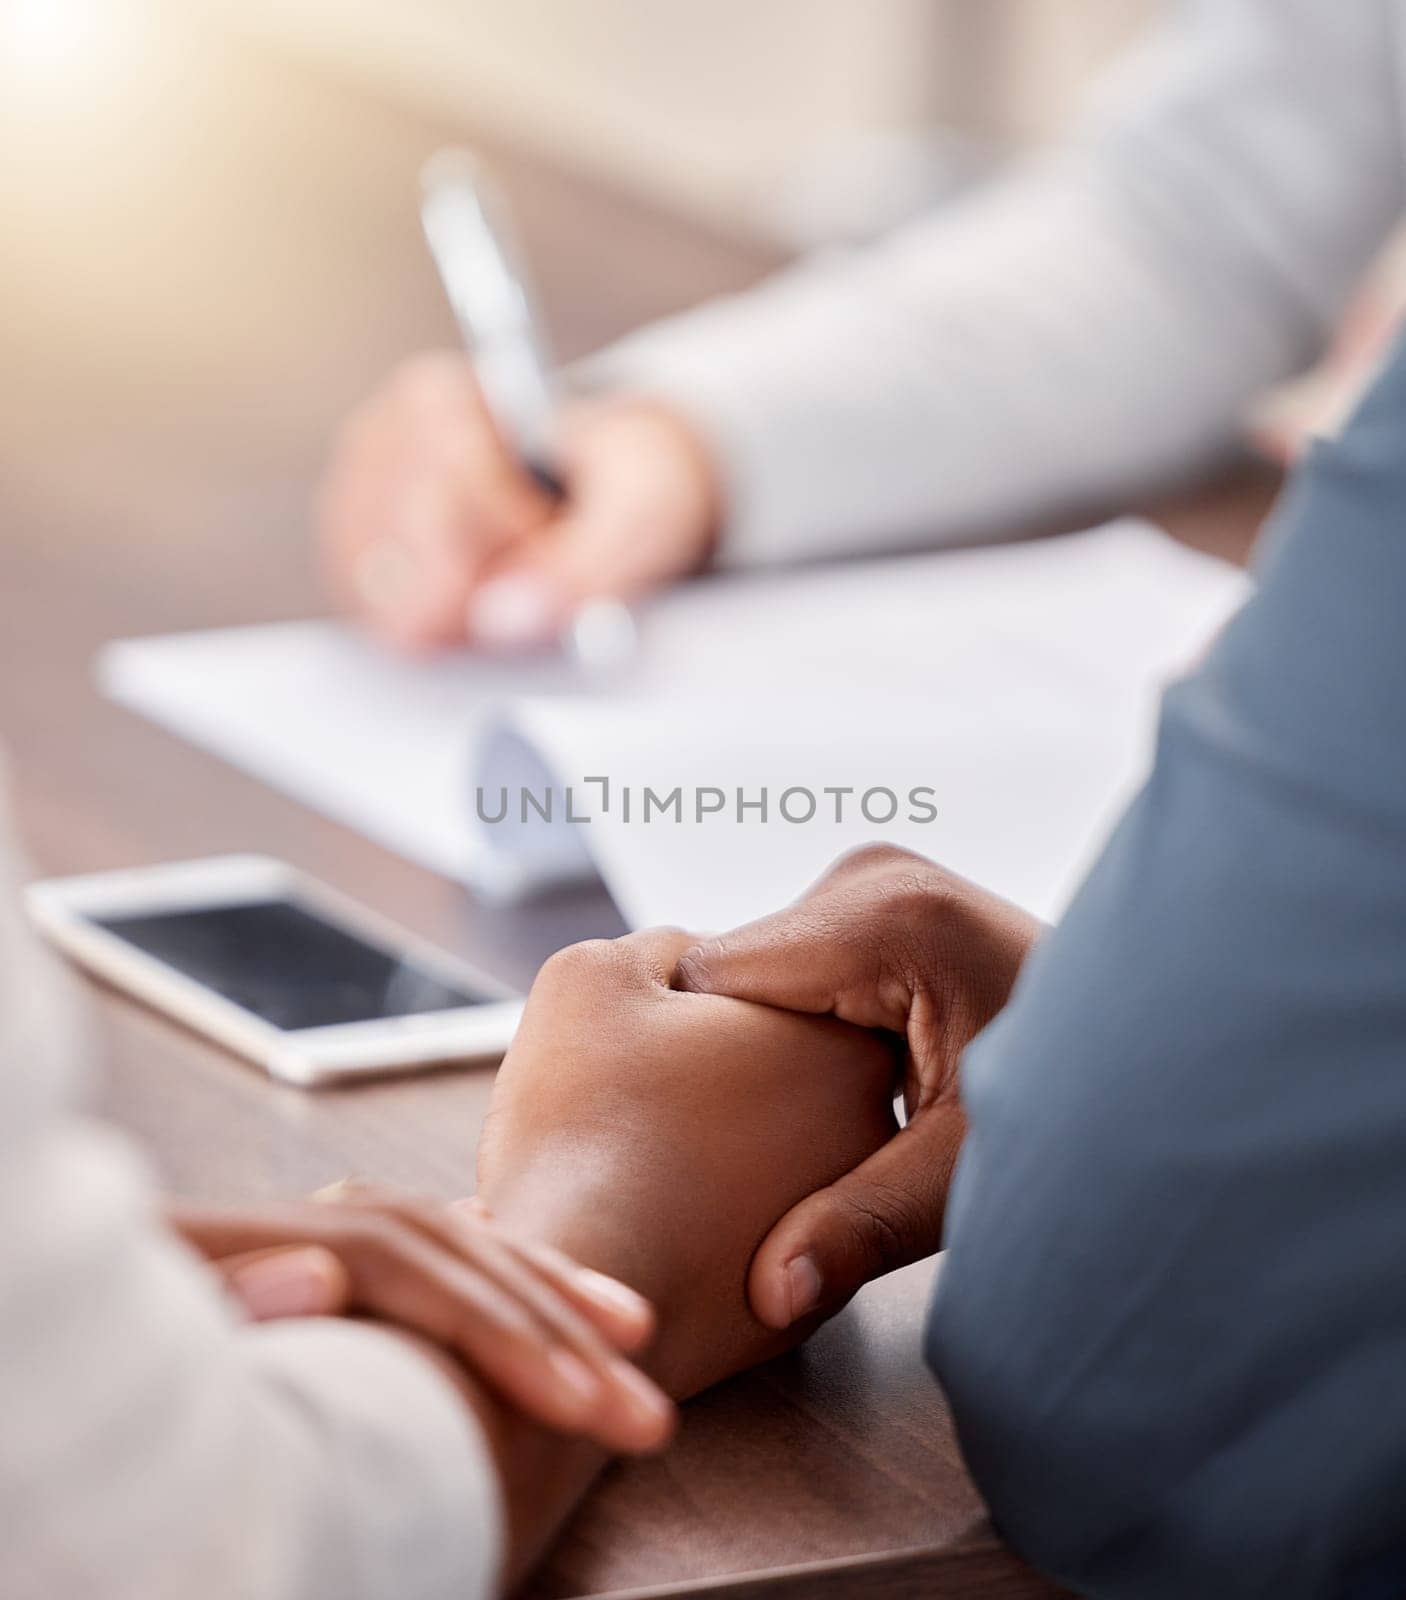 Holding hands, black couple and contract of people in a life insurance meeting with solidarity. Marriage support, love and care busy with documents for healthcare agreement and policy deal at desk by YuriArcurs